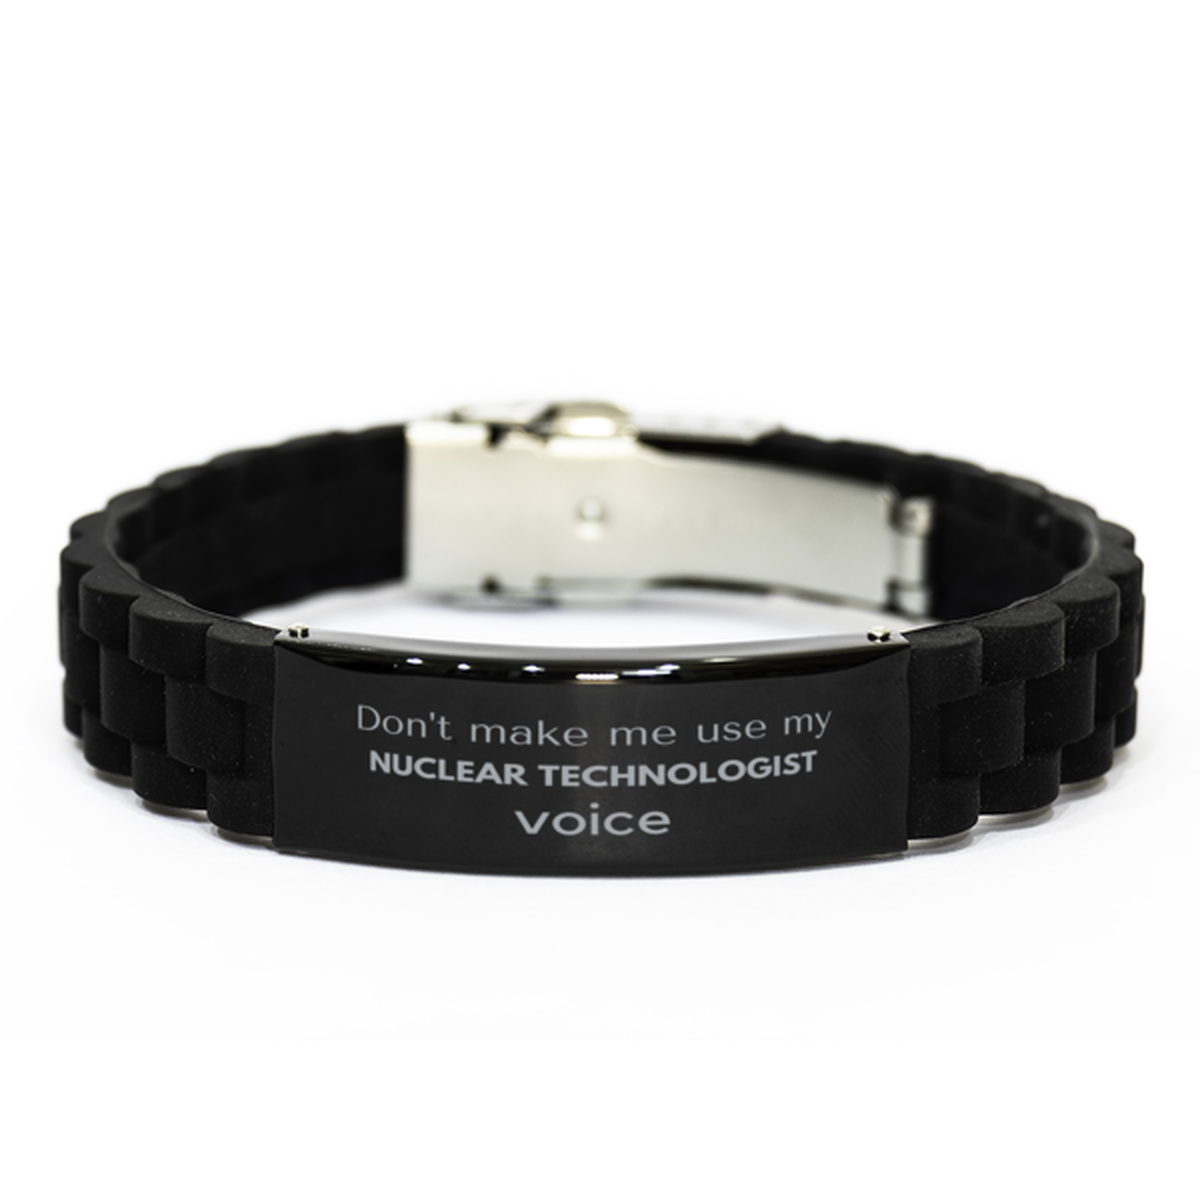 Don't make me use my Nuclear Technologist voice, Sarcasm Nuclear Technologist Gifts, Christmas Nuclear Technologist Black Glidelock Clasp Bracelet Birthday Unique Gifts For Nuclear Technologist Coworkers, Men, Women, Colleague, Friends